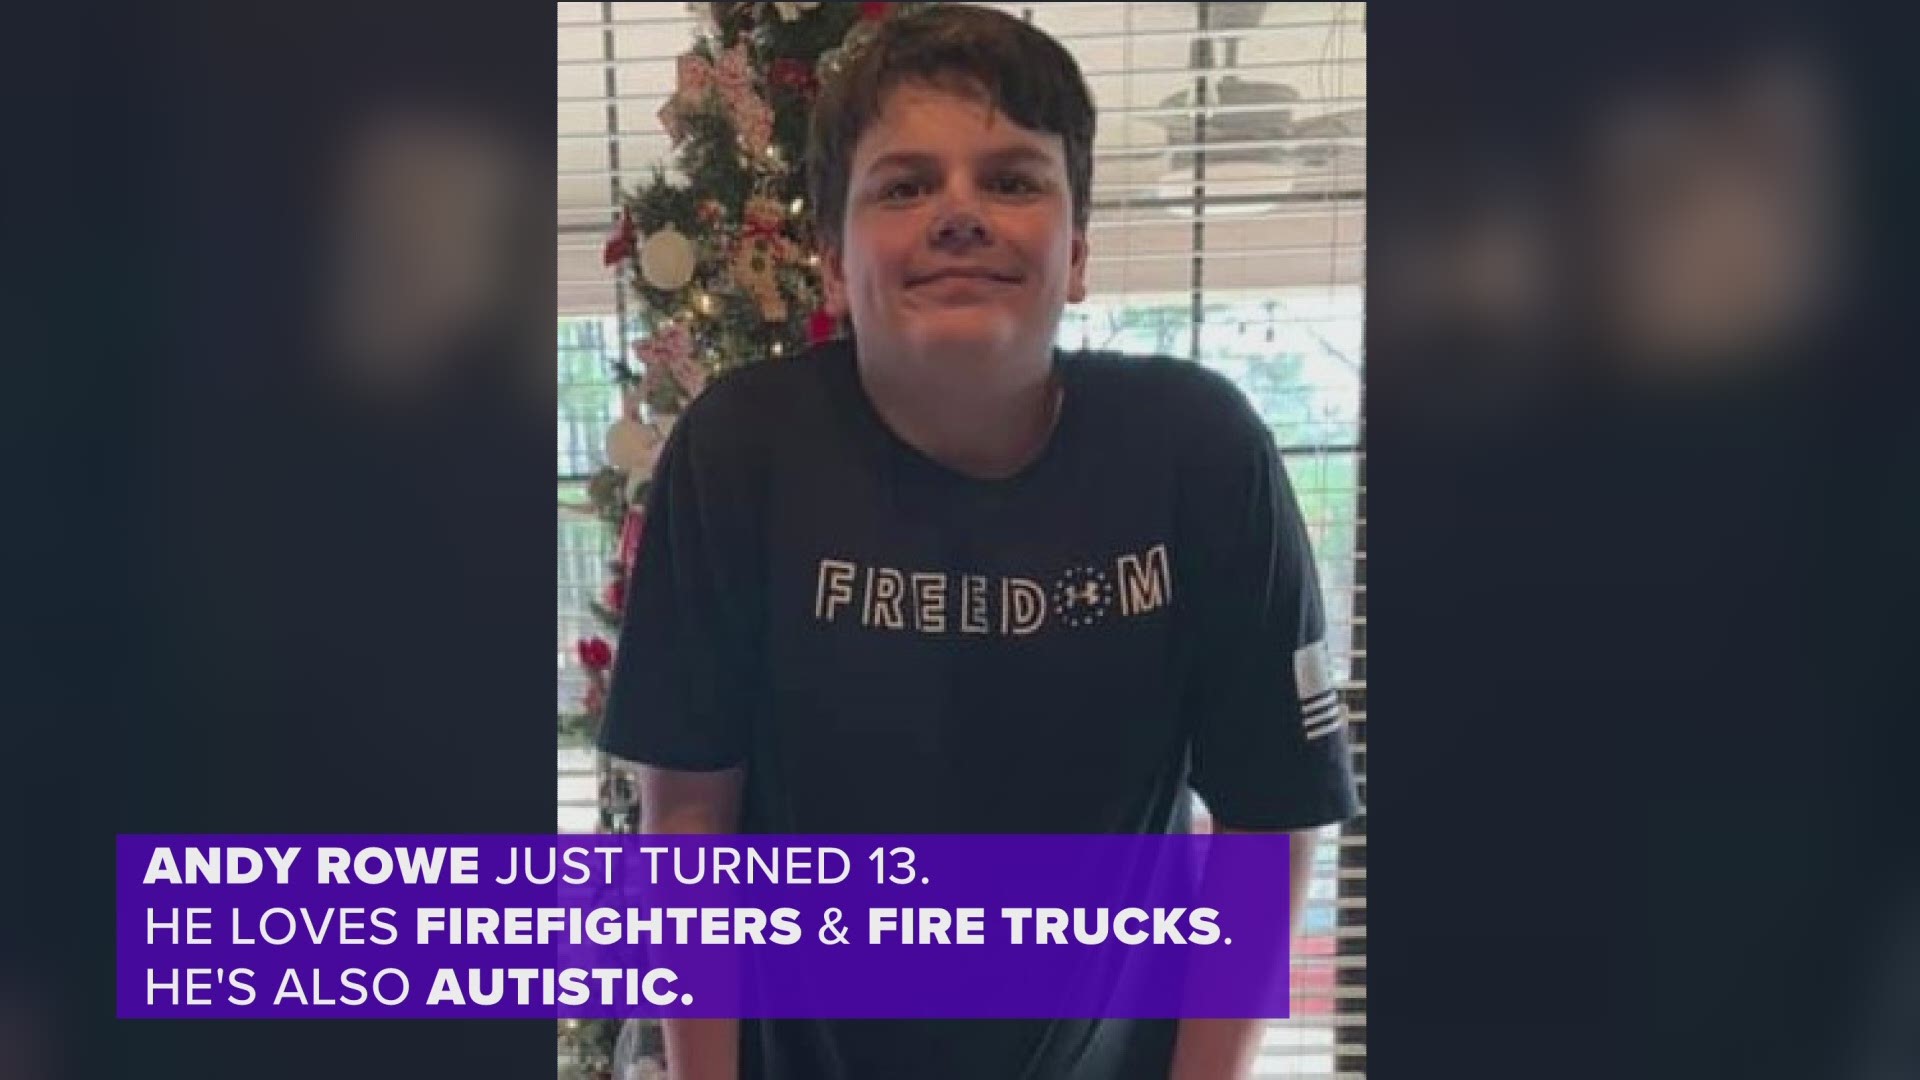 The fire department let 13-year-old Andy Rowe ride in their fire truck, giving him the "best Christmas ever."